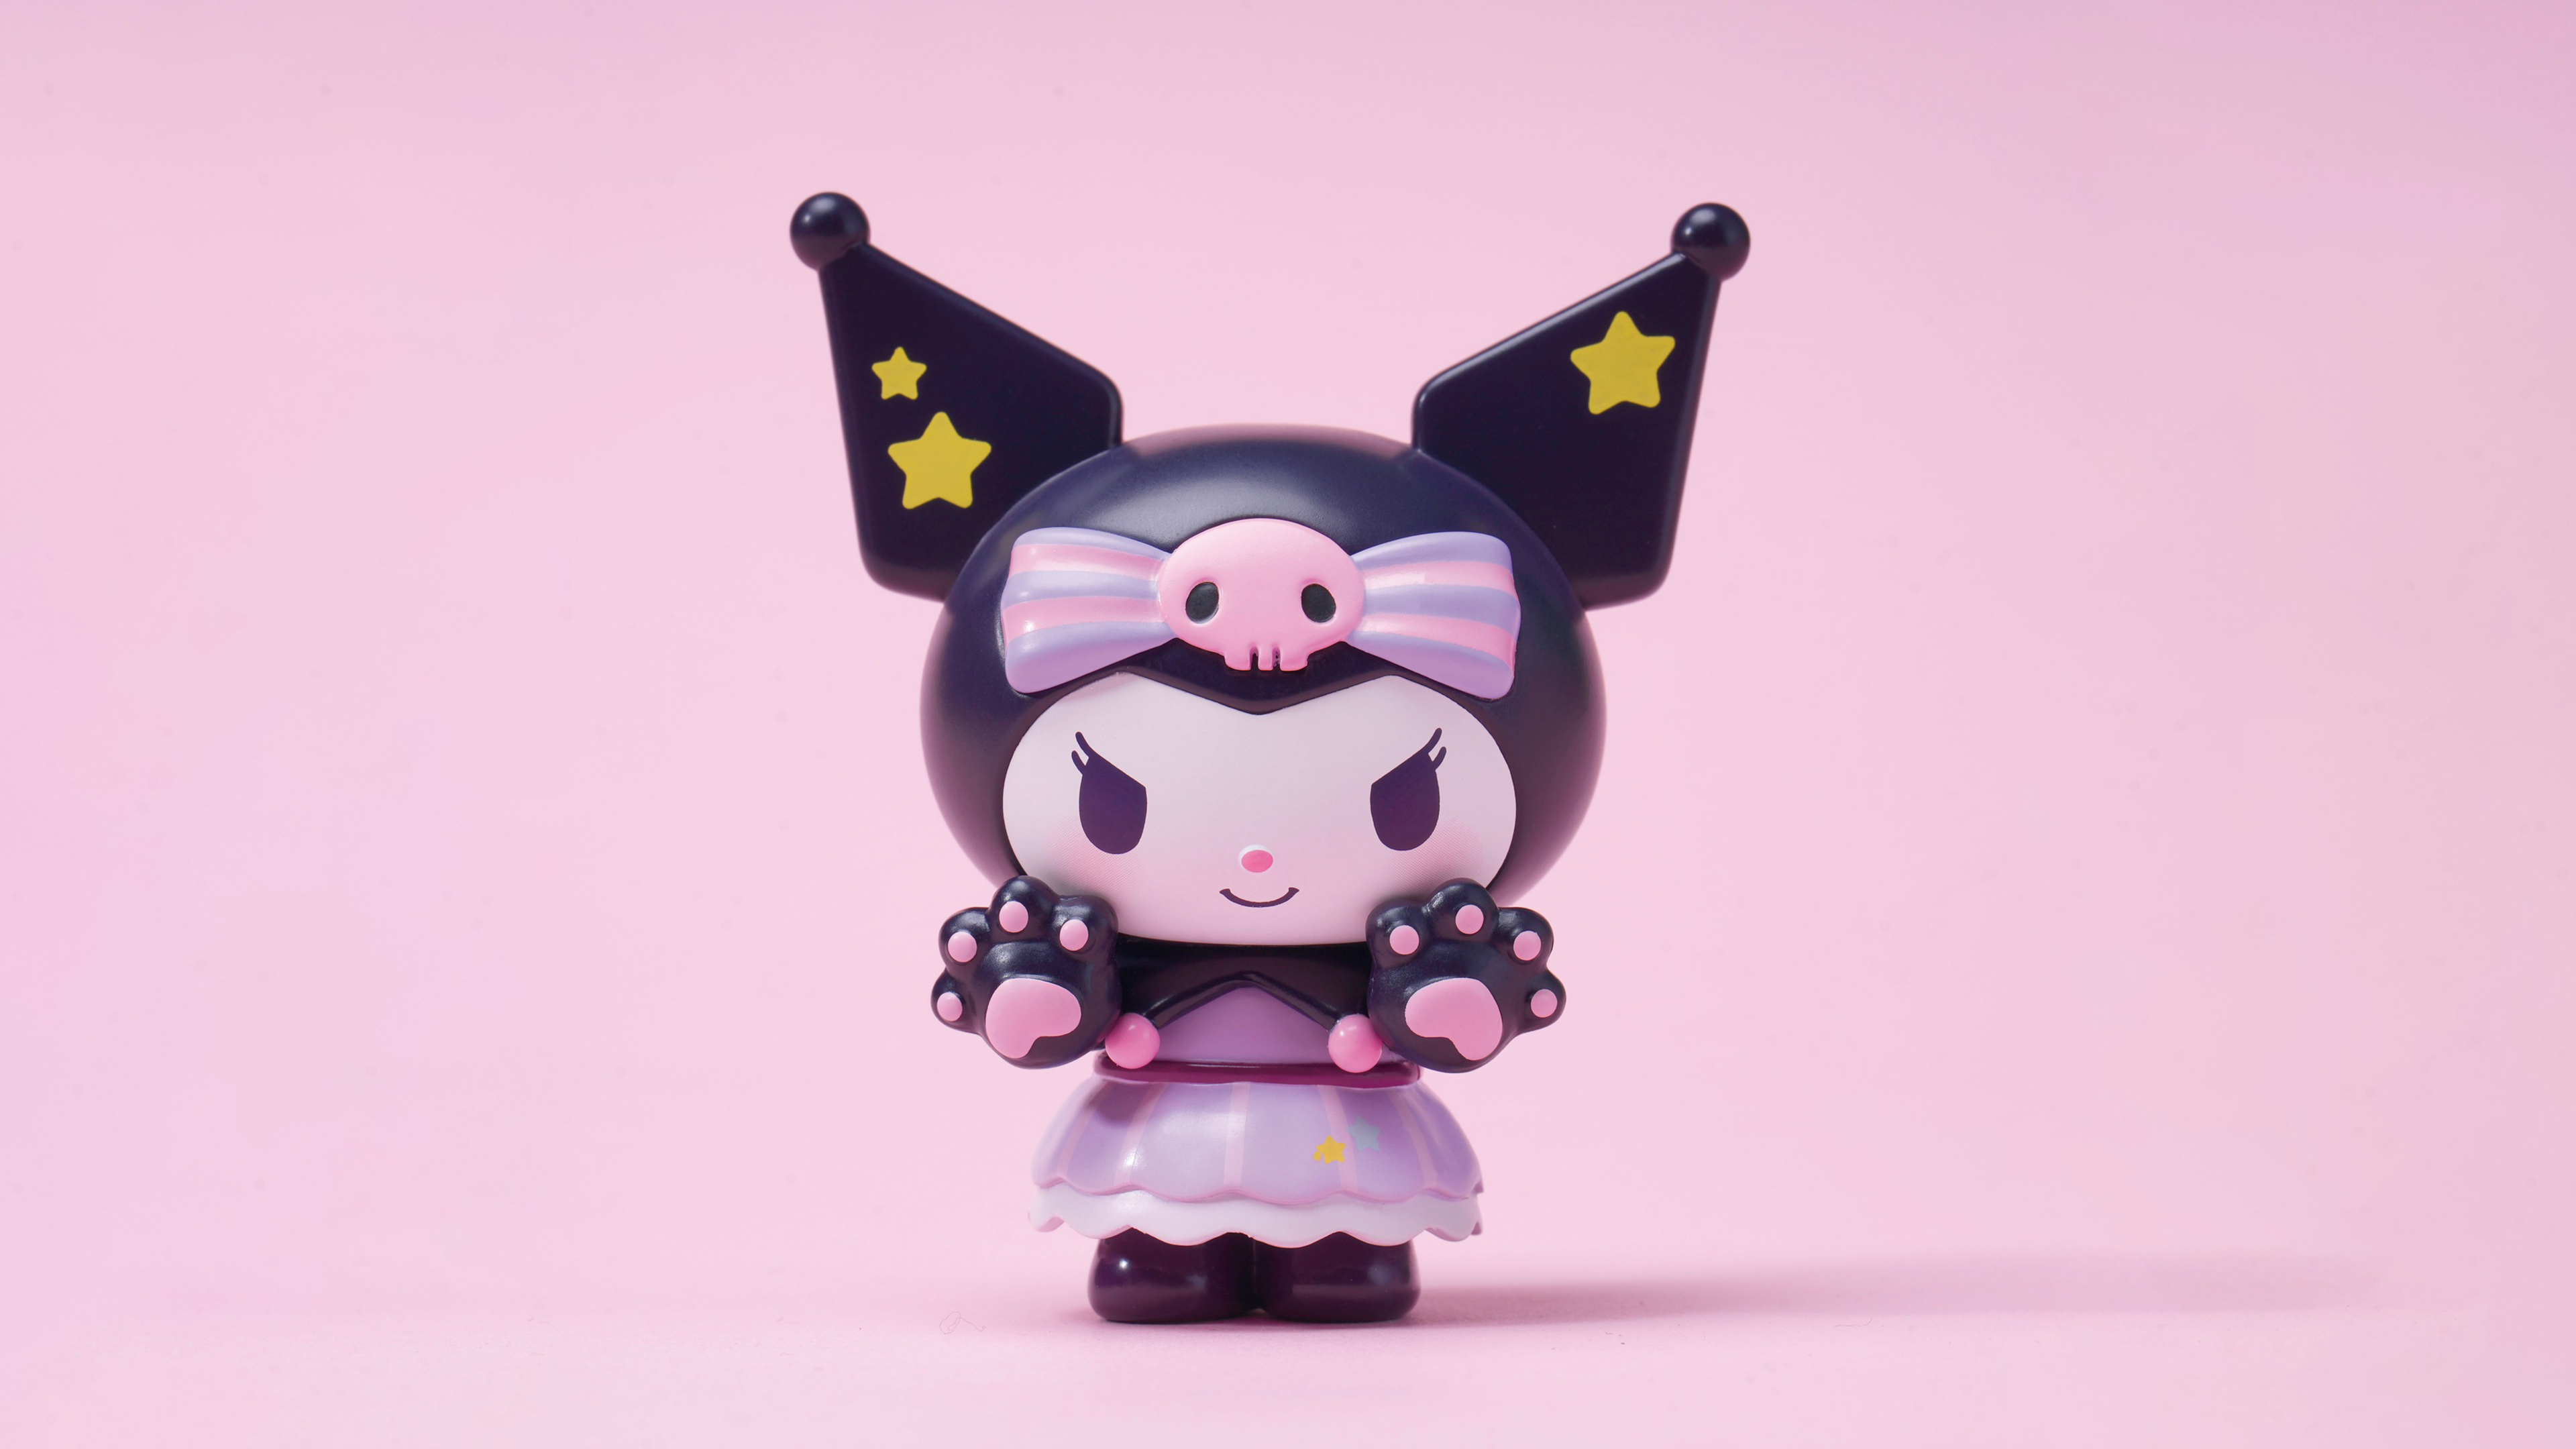 HD wallpaper of Kuromi from Onegai My Melody anime, featuring the character in her signature black jester hat with pink accents and star details, on a pastel pink background suitable for desktops.